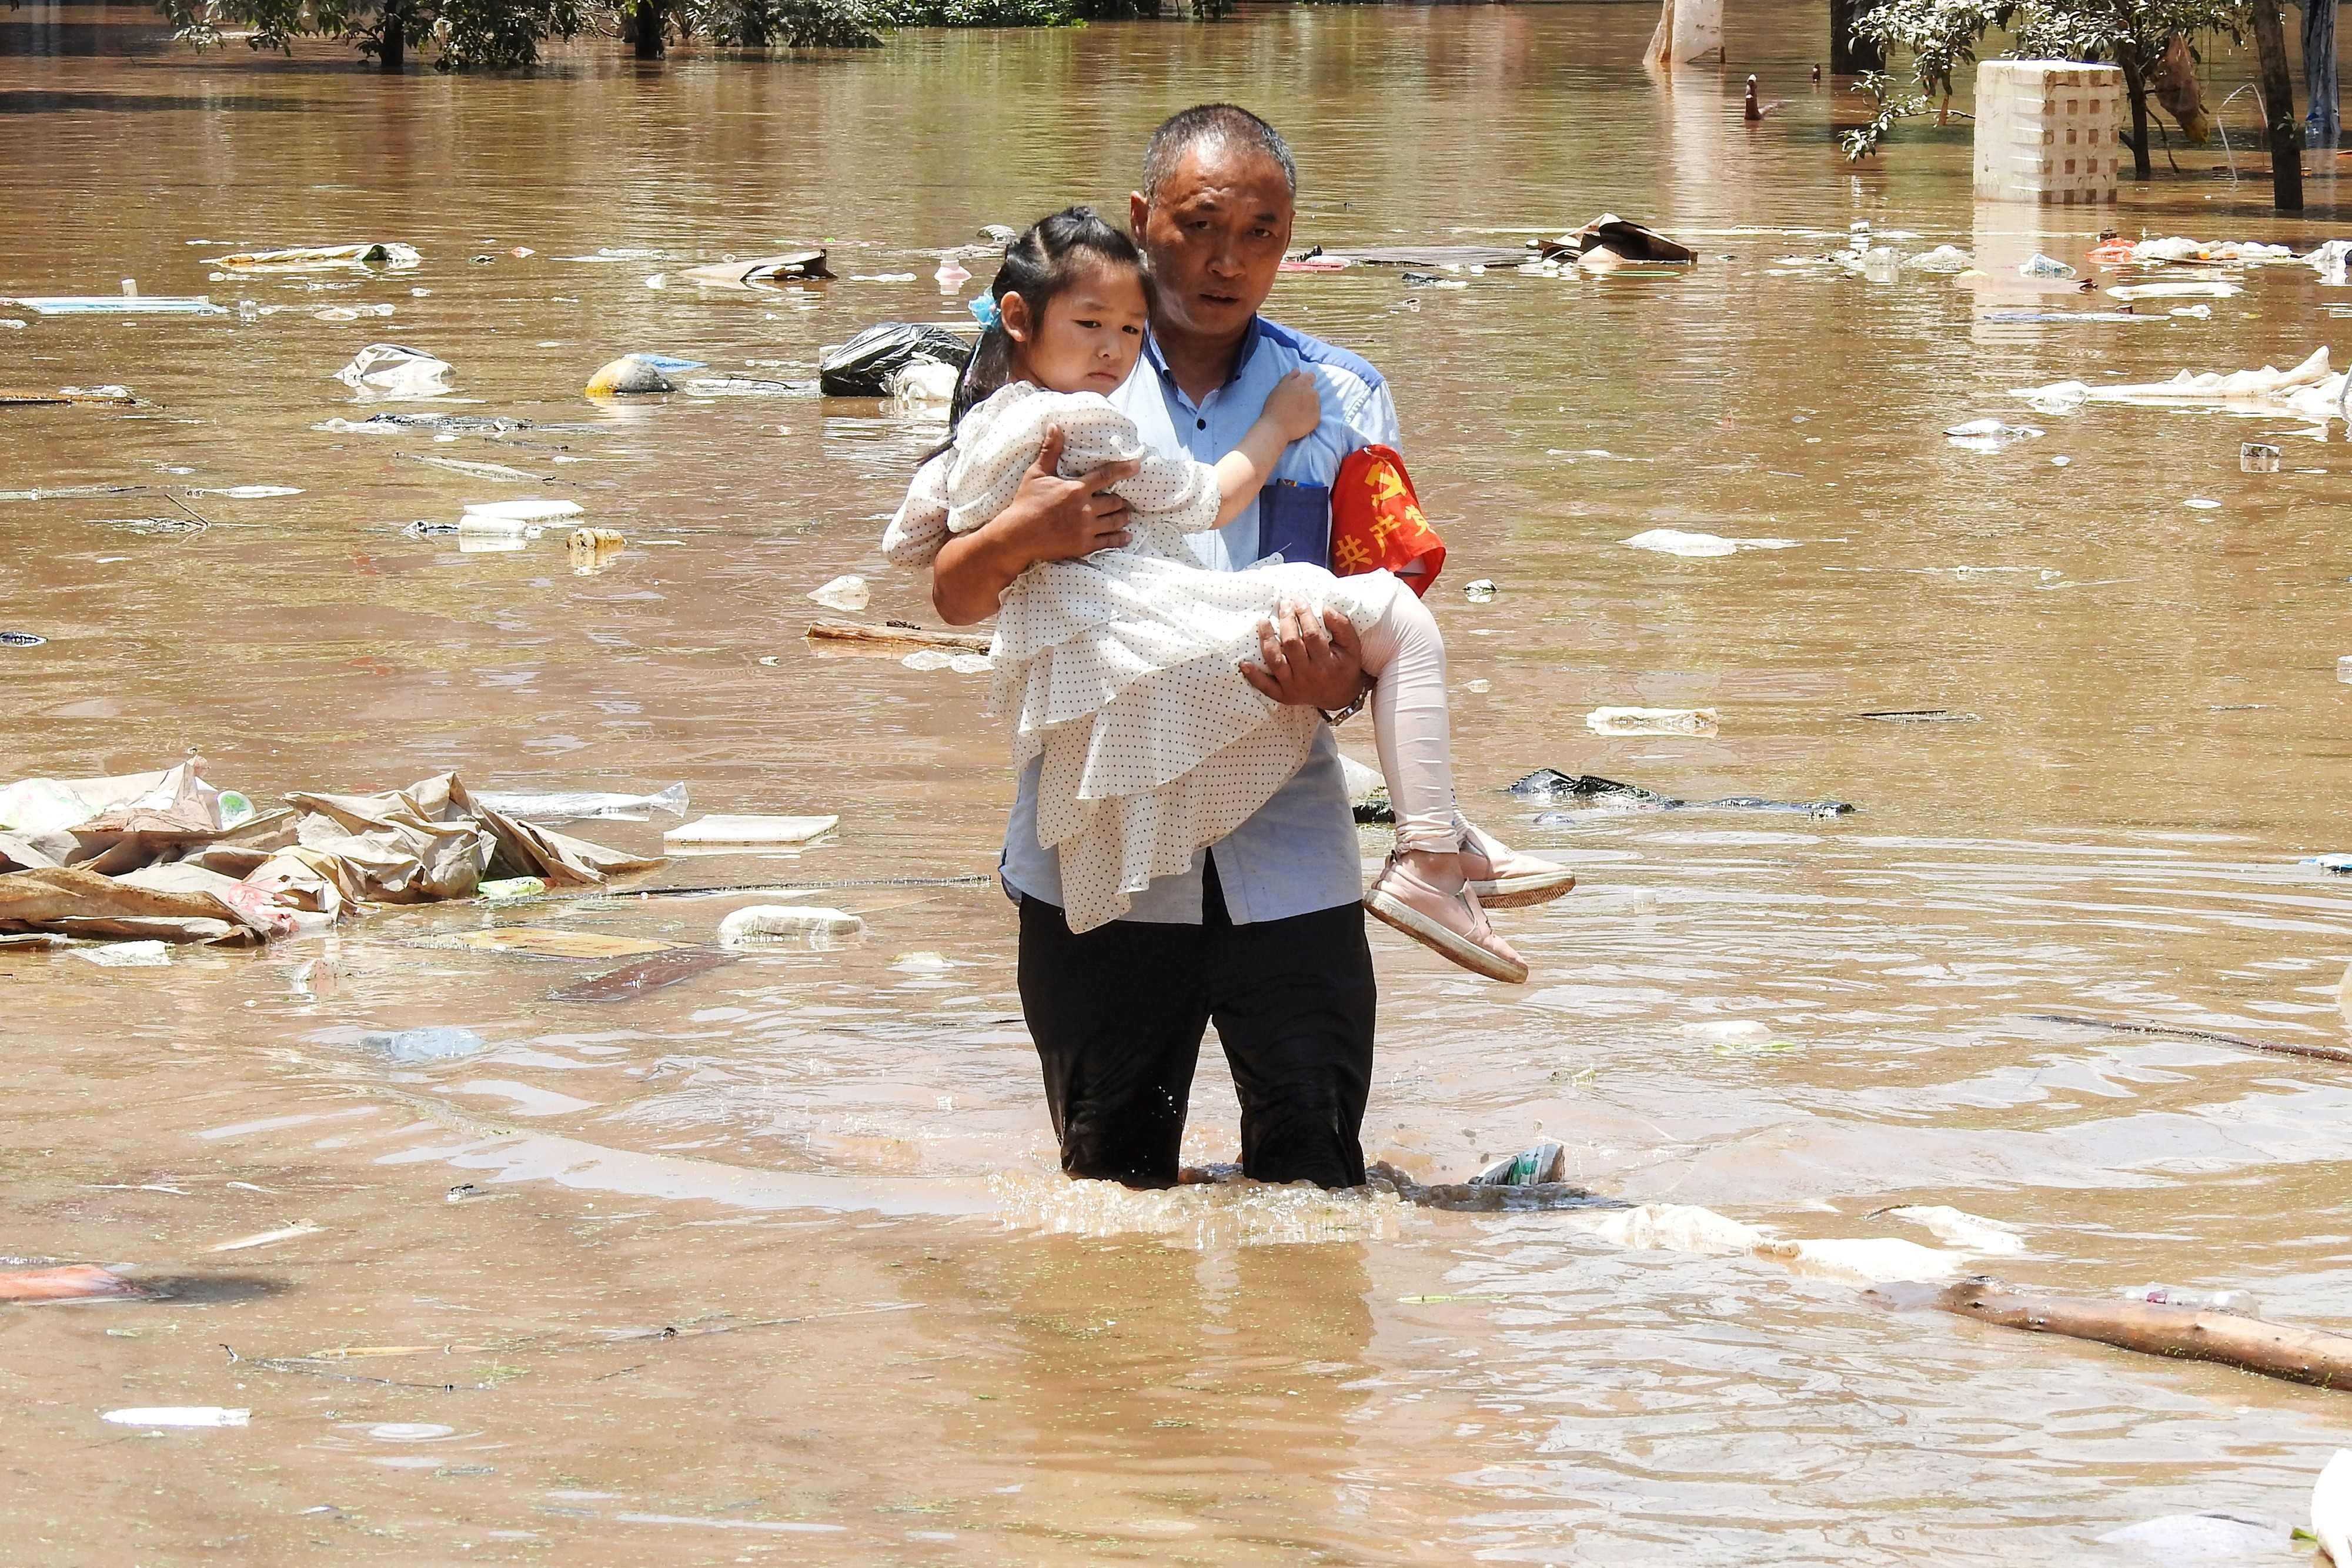 A village official evacuates a child from a flooded area on Monday following heavy rains in Dazhou, Sichuan province. Photo: AFP